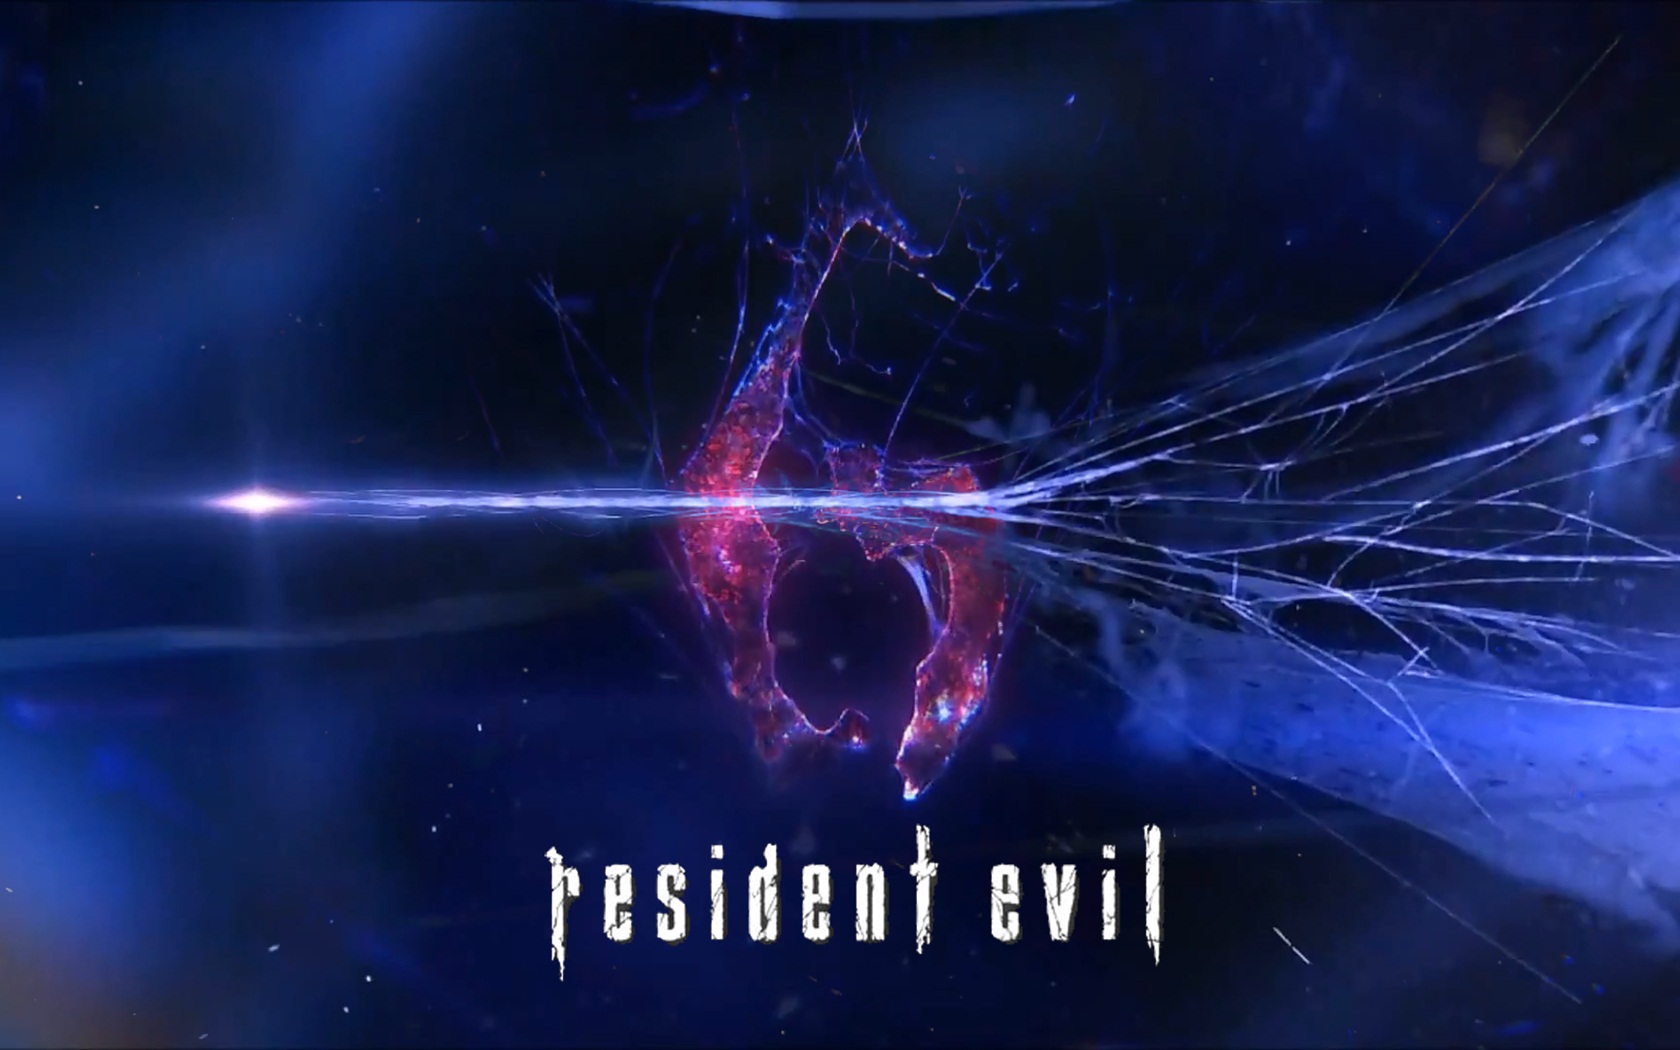 Resident Evil 6 HD game wallpapers #12 - 1680x1050